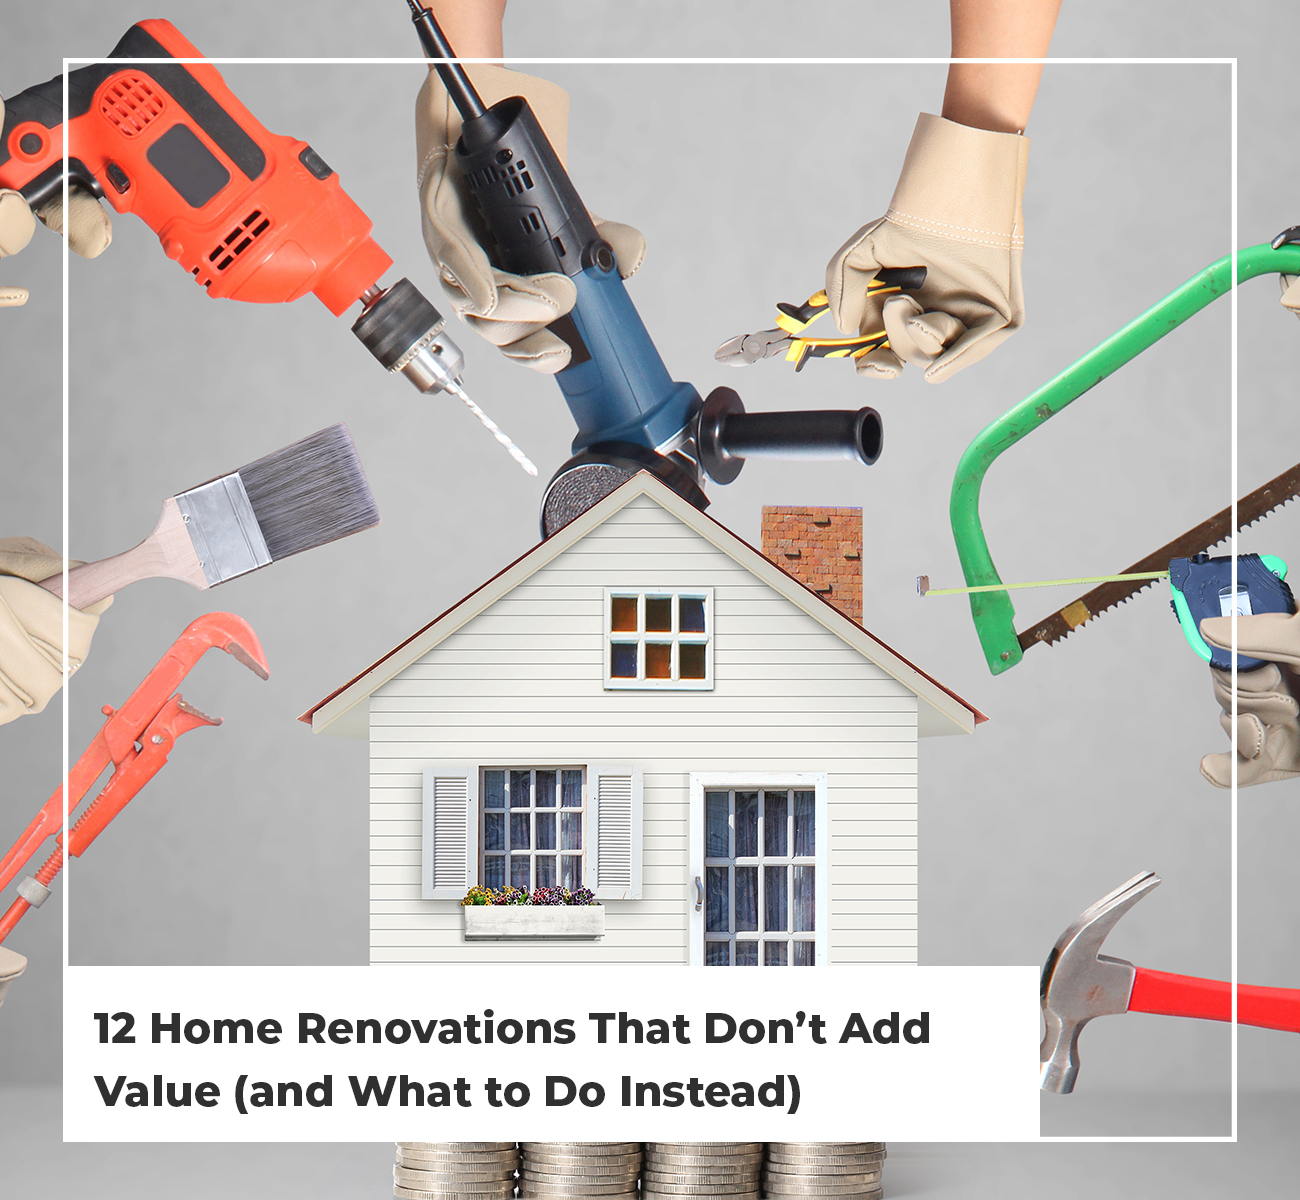 Home Renovations That Don't Add Value